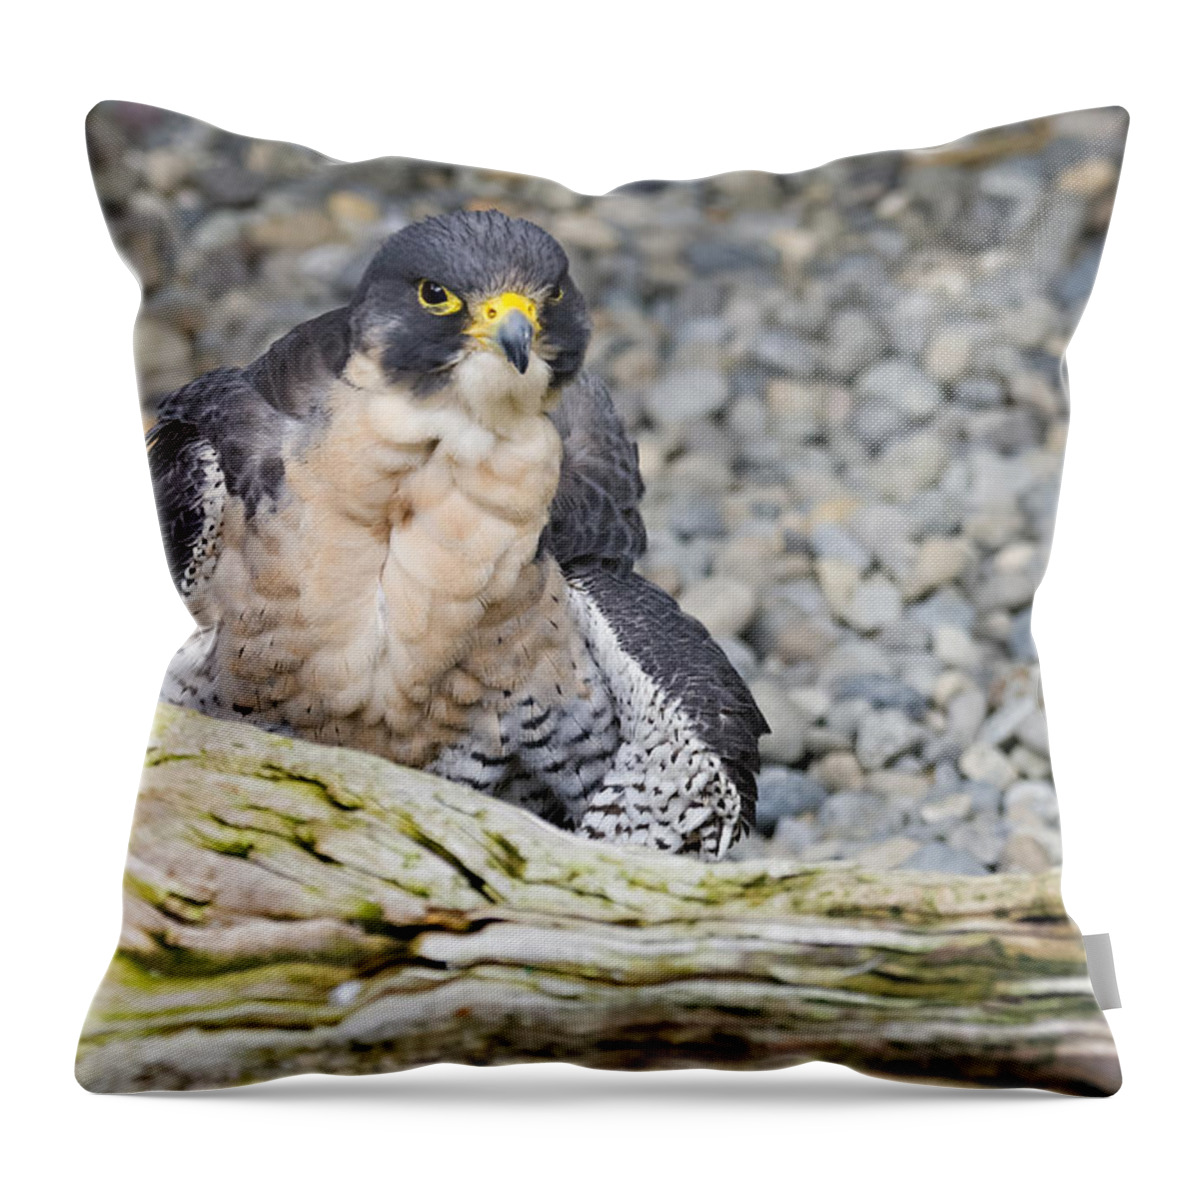 Peregrine Throw Pillow featuring the photograph Peregrine Falcon 2 by Harold Piskiel